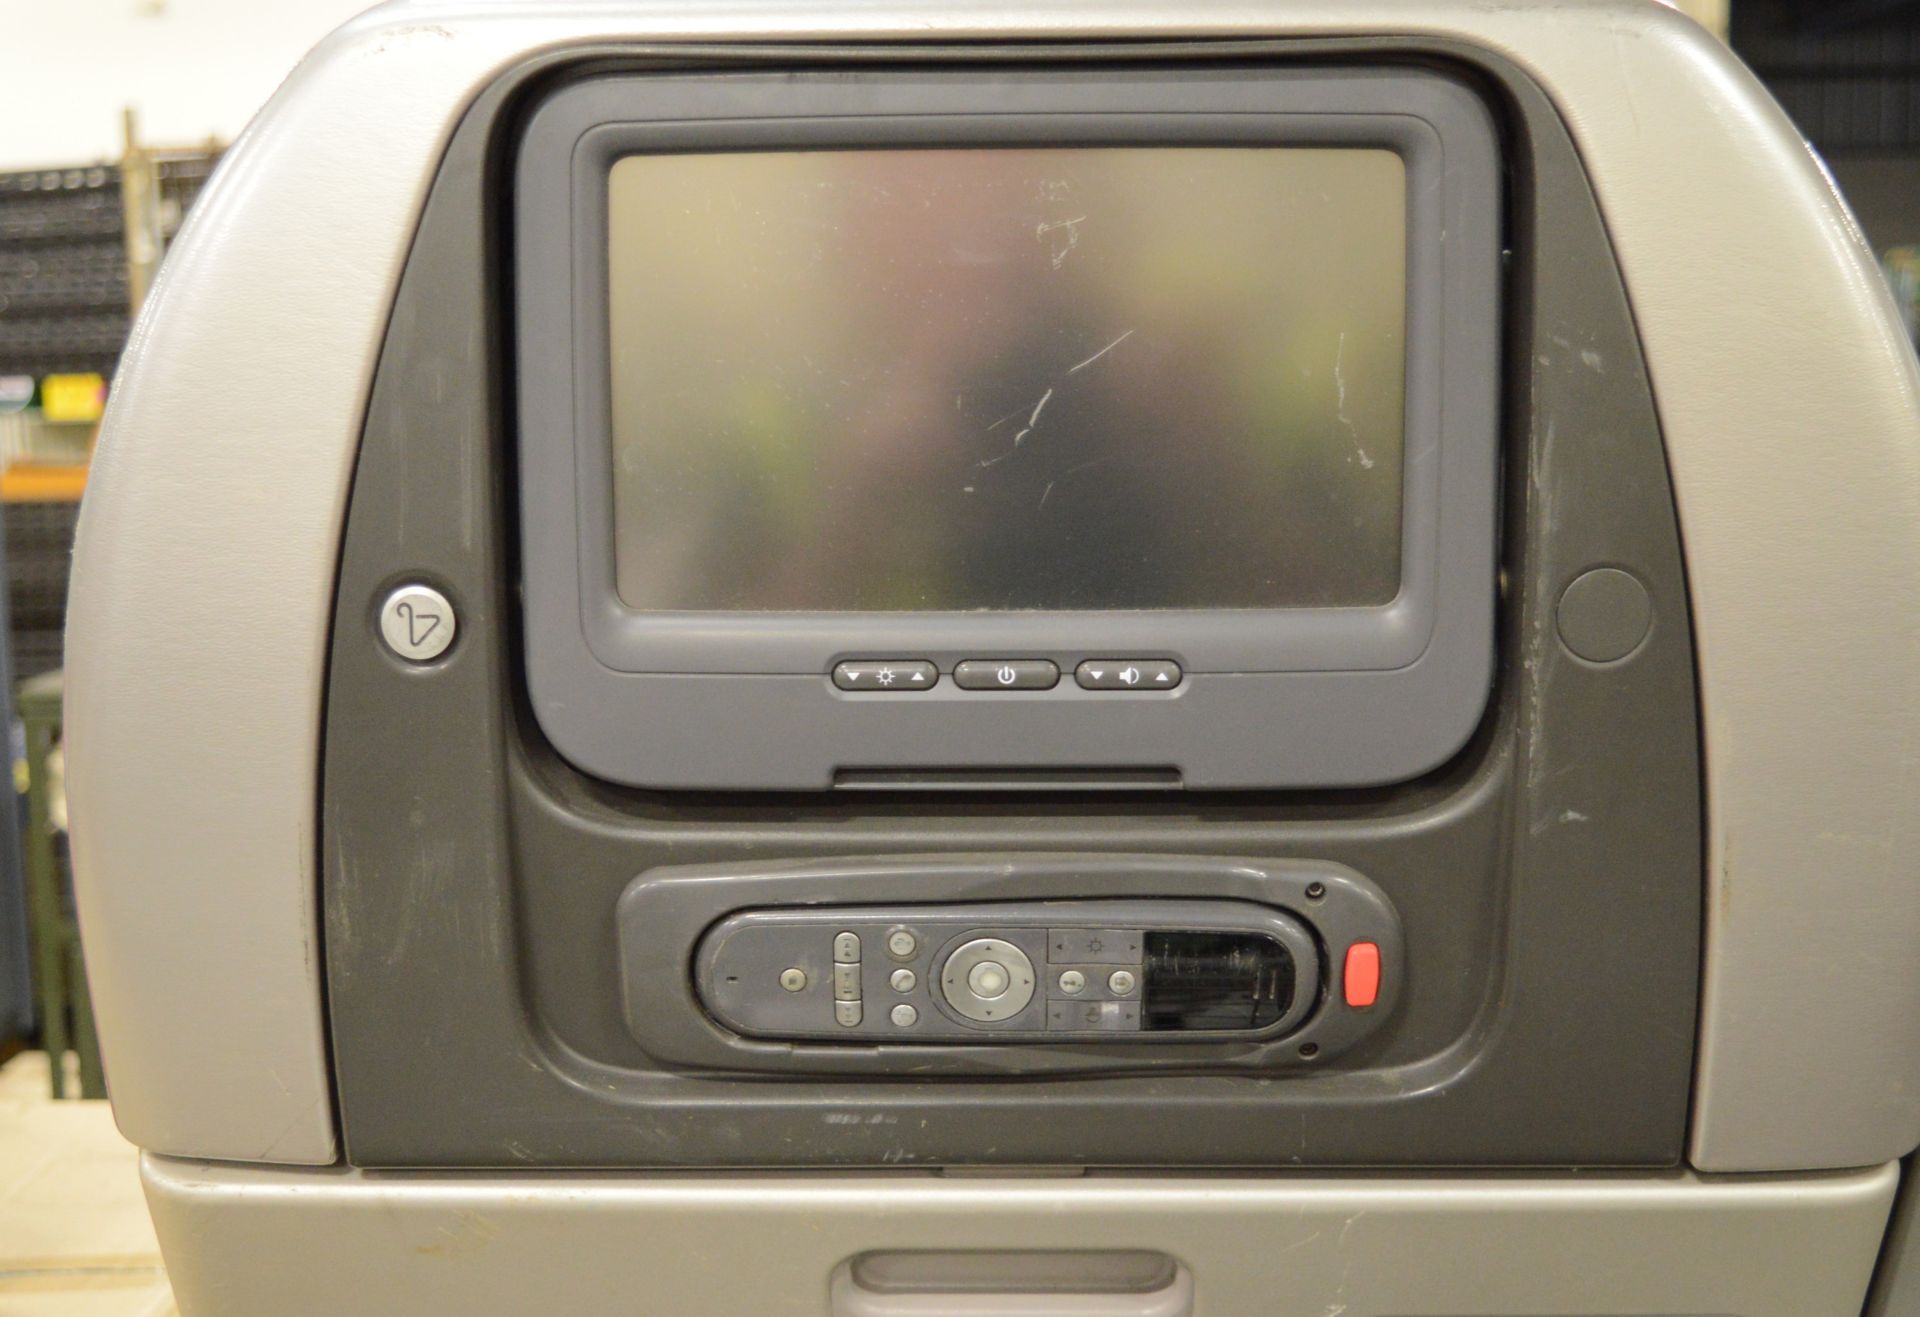 Aircraft Triple Seating triple with Rear TV Screens & Remote Controls. - Image 2 of 2